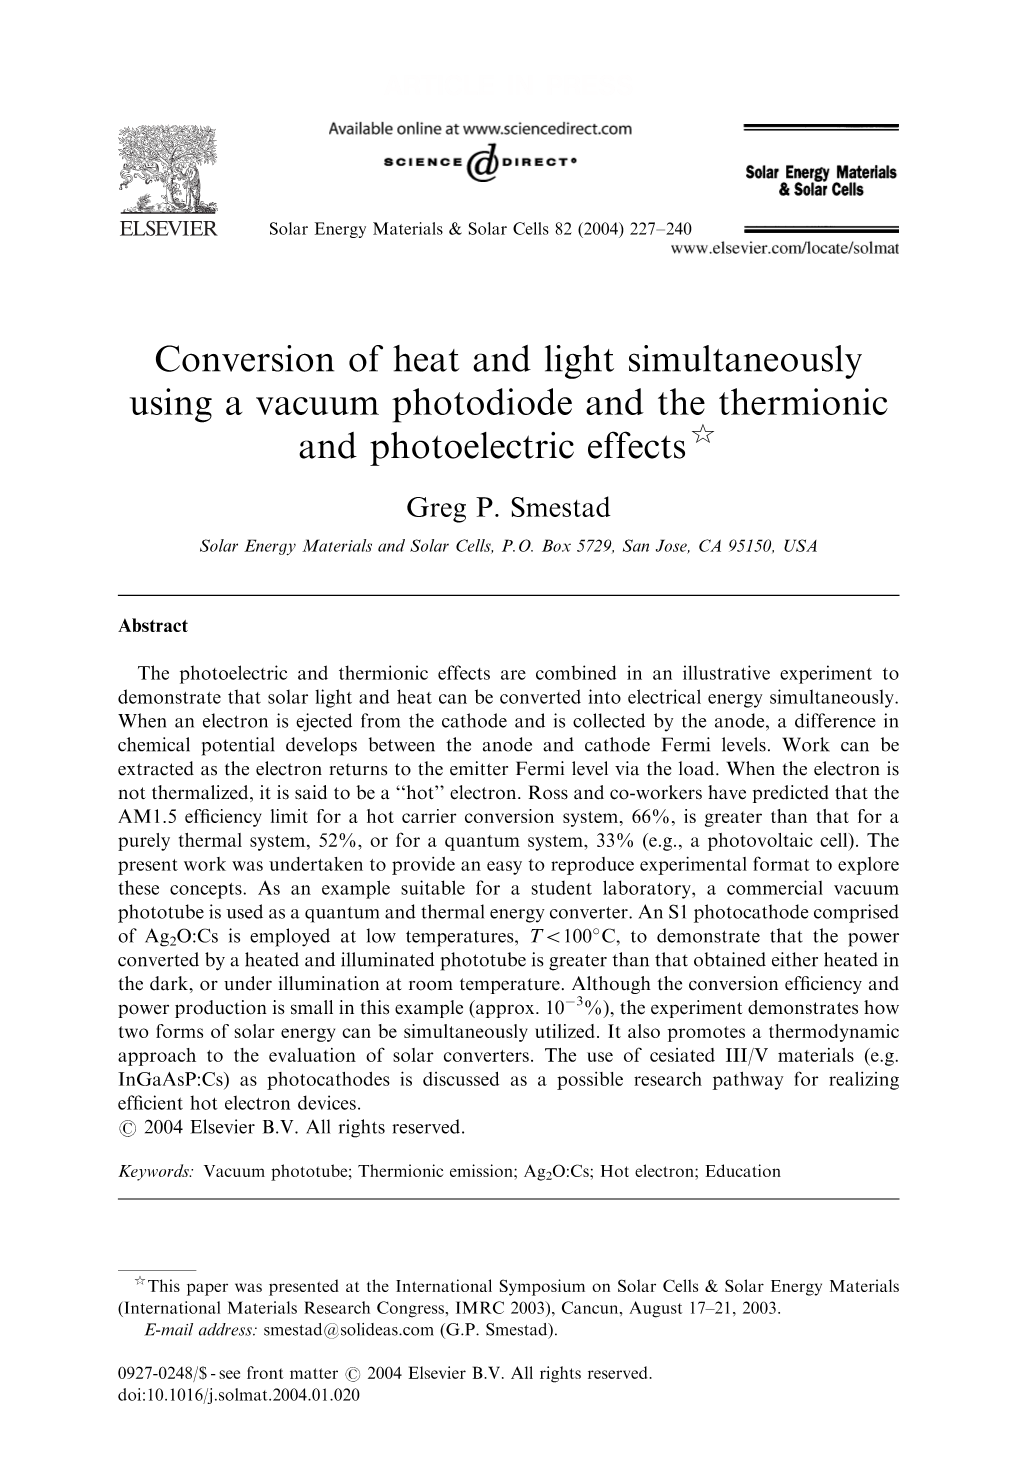 Conversion of Heat and Light Simultaneously Using a Vacuum Photodiode and the Thermionic and Photoelectric Effects$